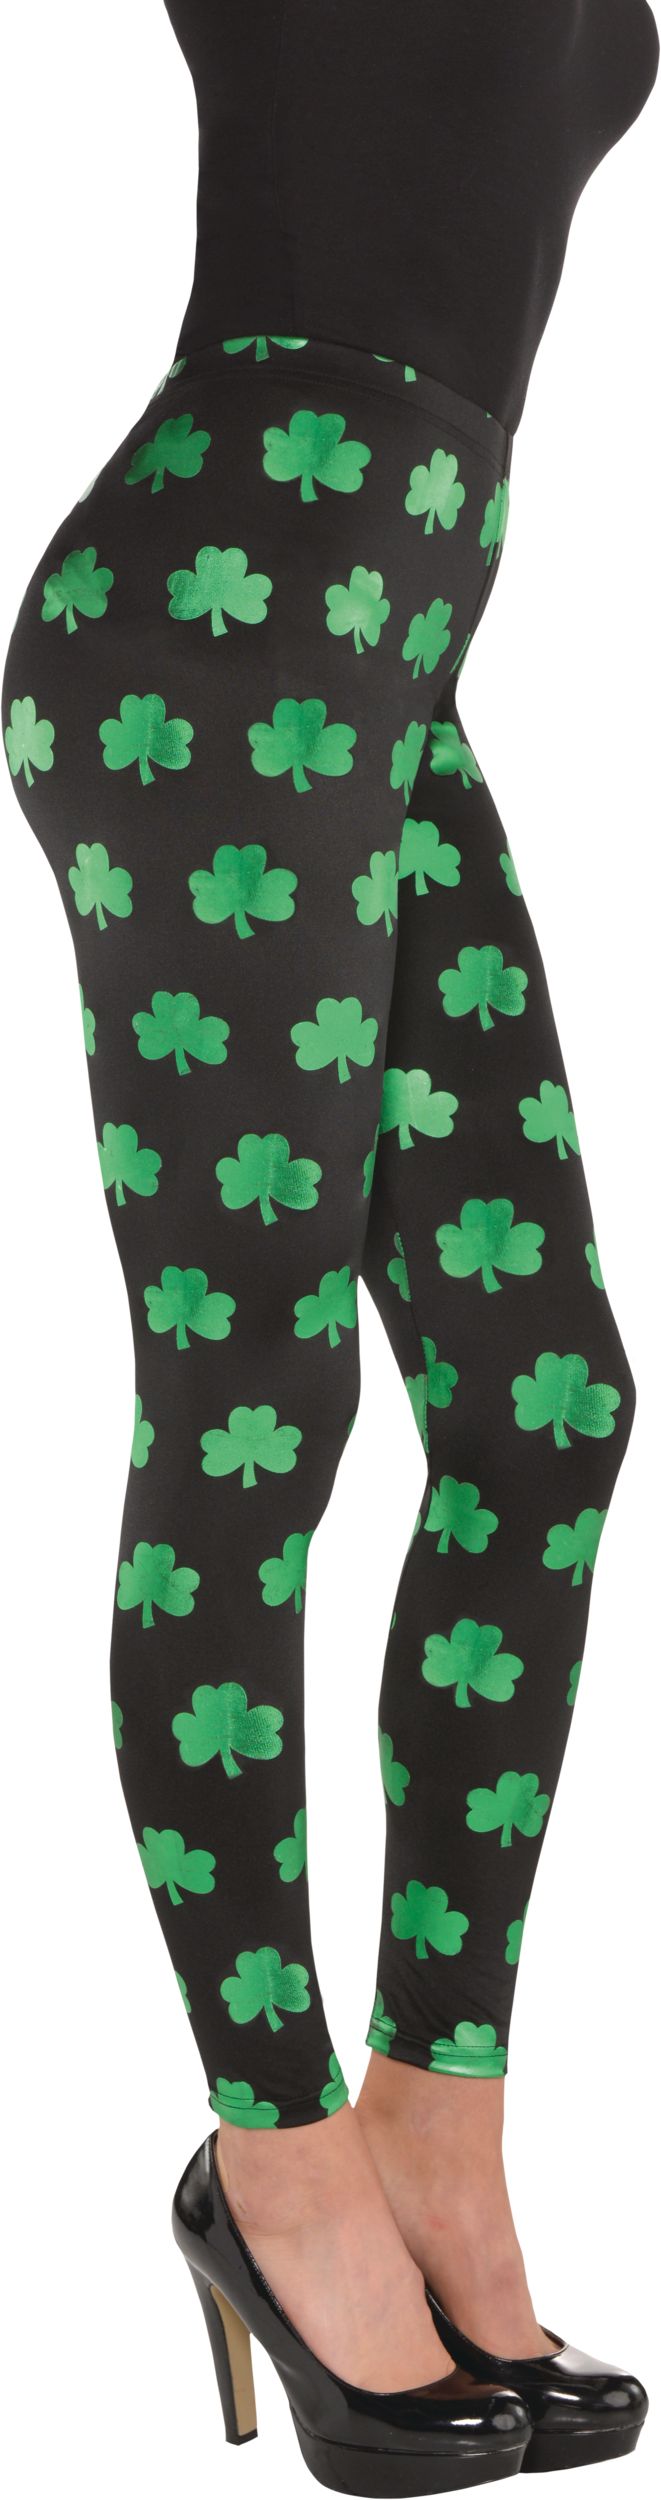 Best Deal for Workout Leggings for Women, St. Patrick's Day Thick Pants